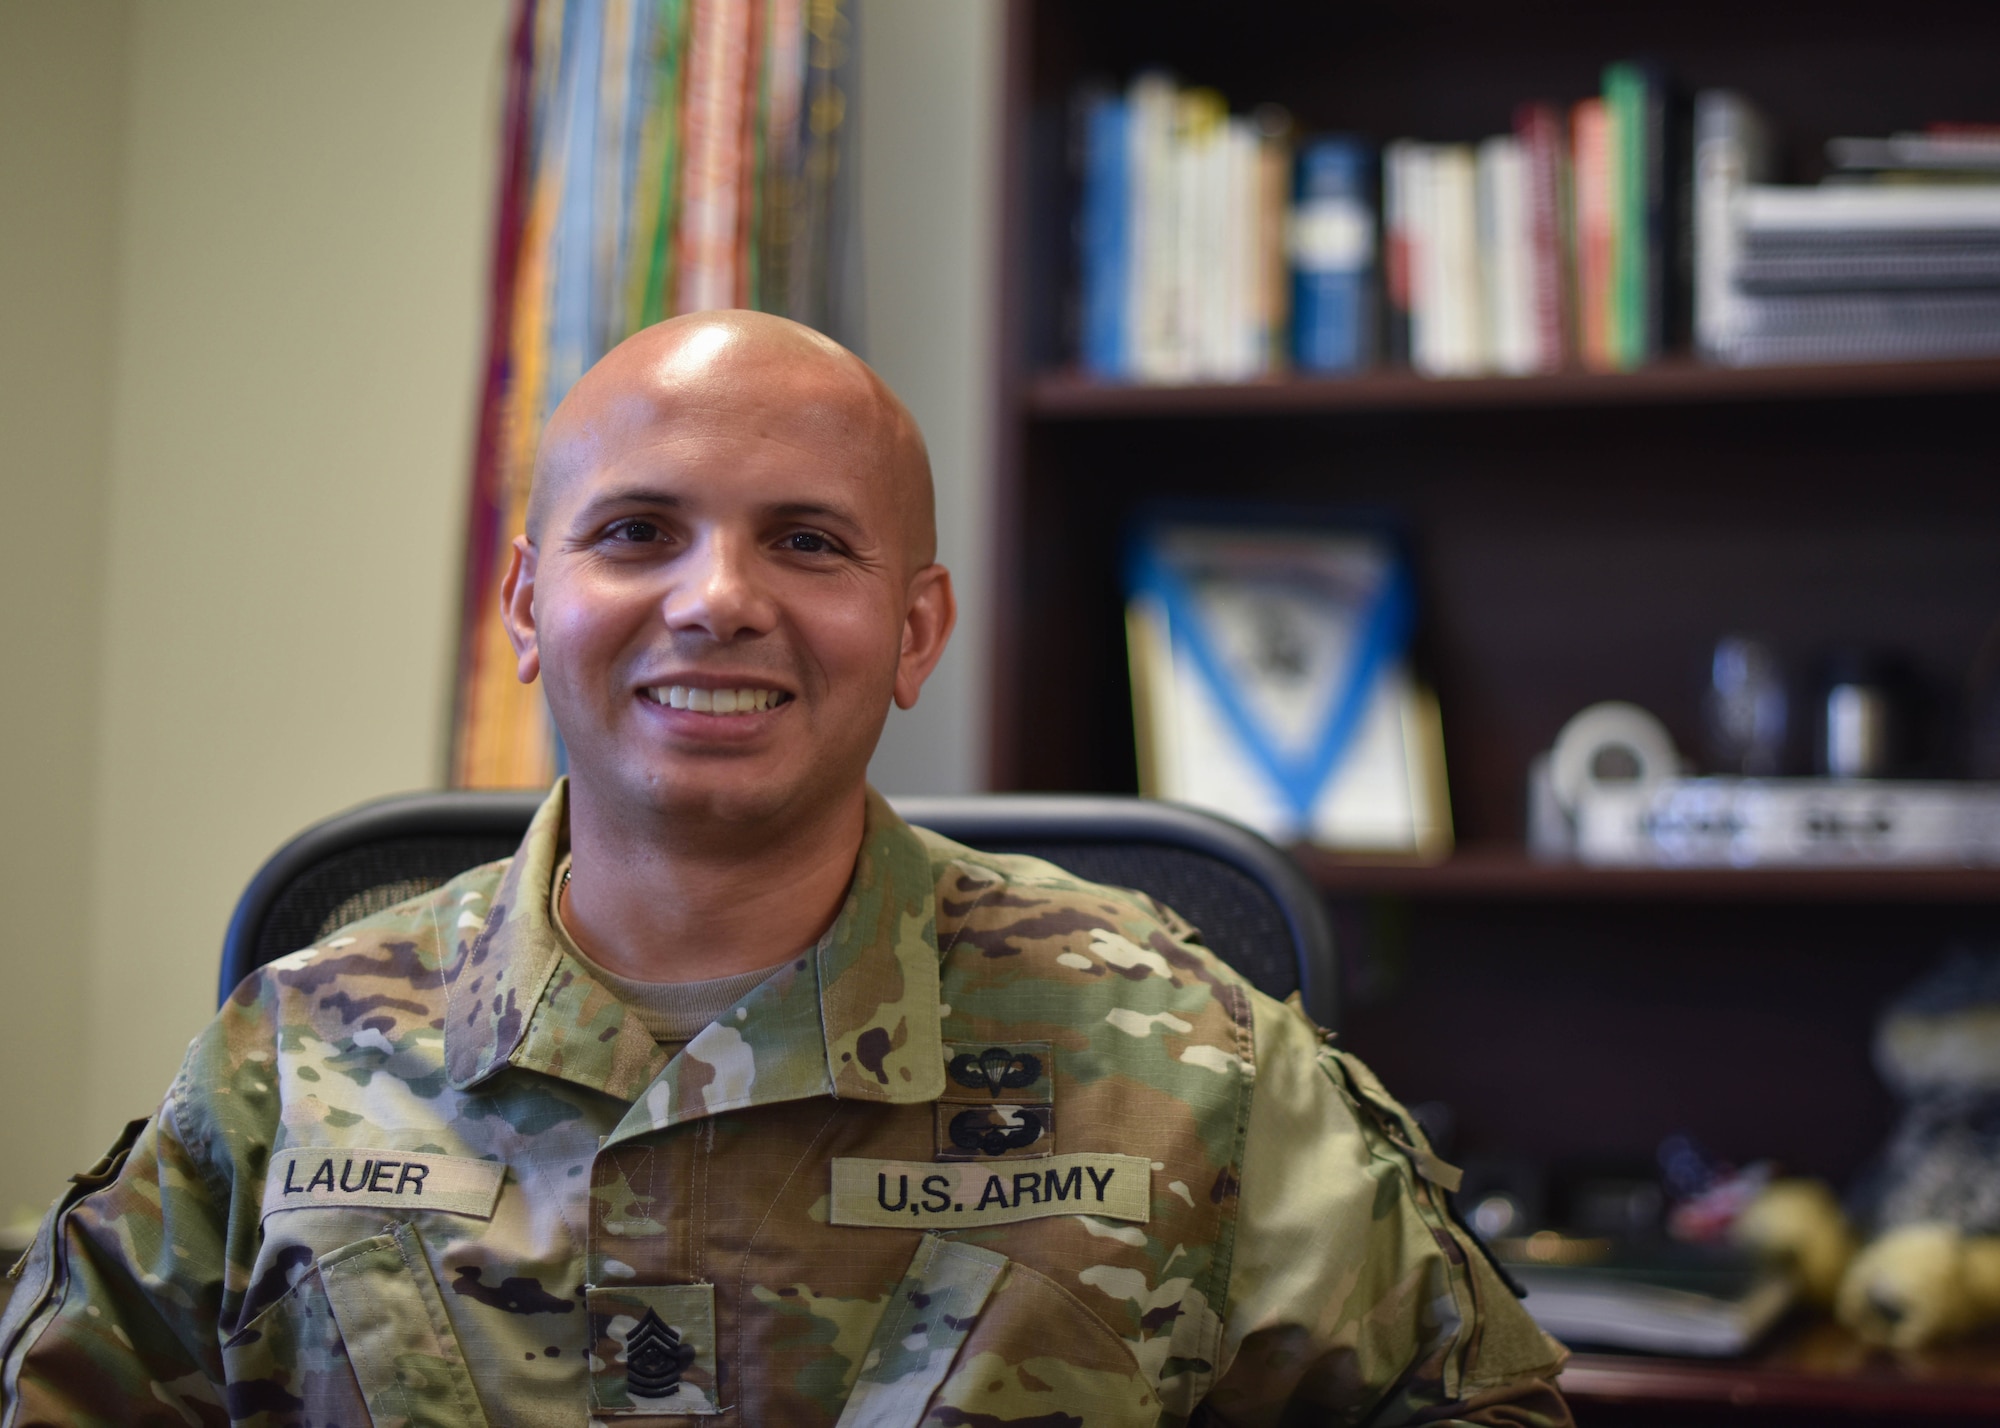 U.S. Army Command Sgt. Maj. Jason Lauer, command sgt. maj. of the 344th Military Intelligence Battalion, sits at his desk within the Army headquarters building on Goodfellow Air Force Base, Texas, July 30. As the senior enlisted advisor to the commander Lauer is responsible for developing the next generation of signals intelligence and cyber Soldiers. (U.S. Air Force Photo by Senior Airman Seraiah Wolf)